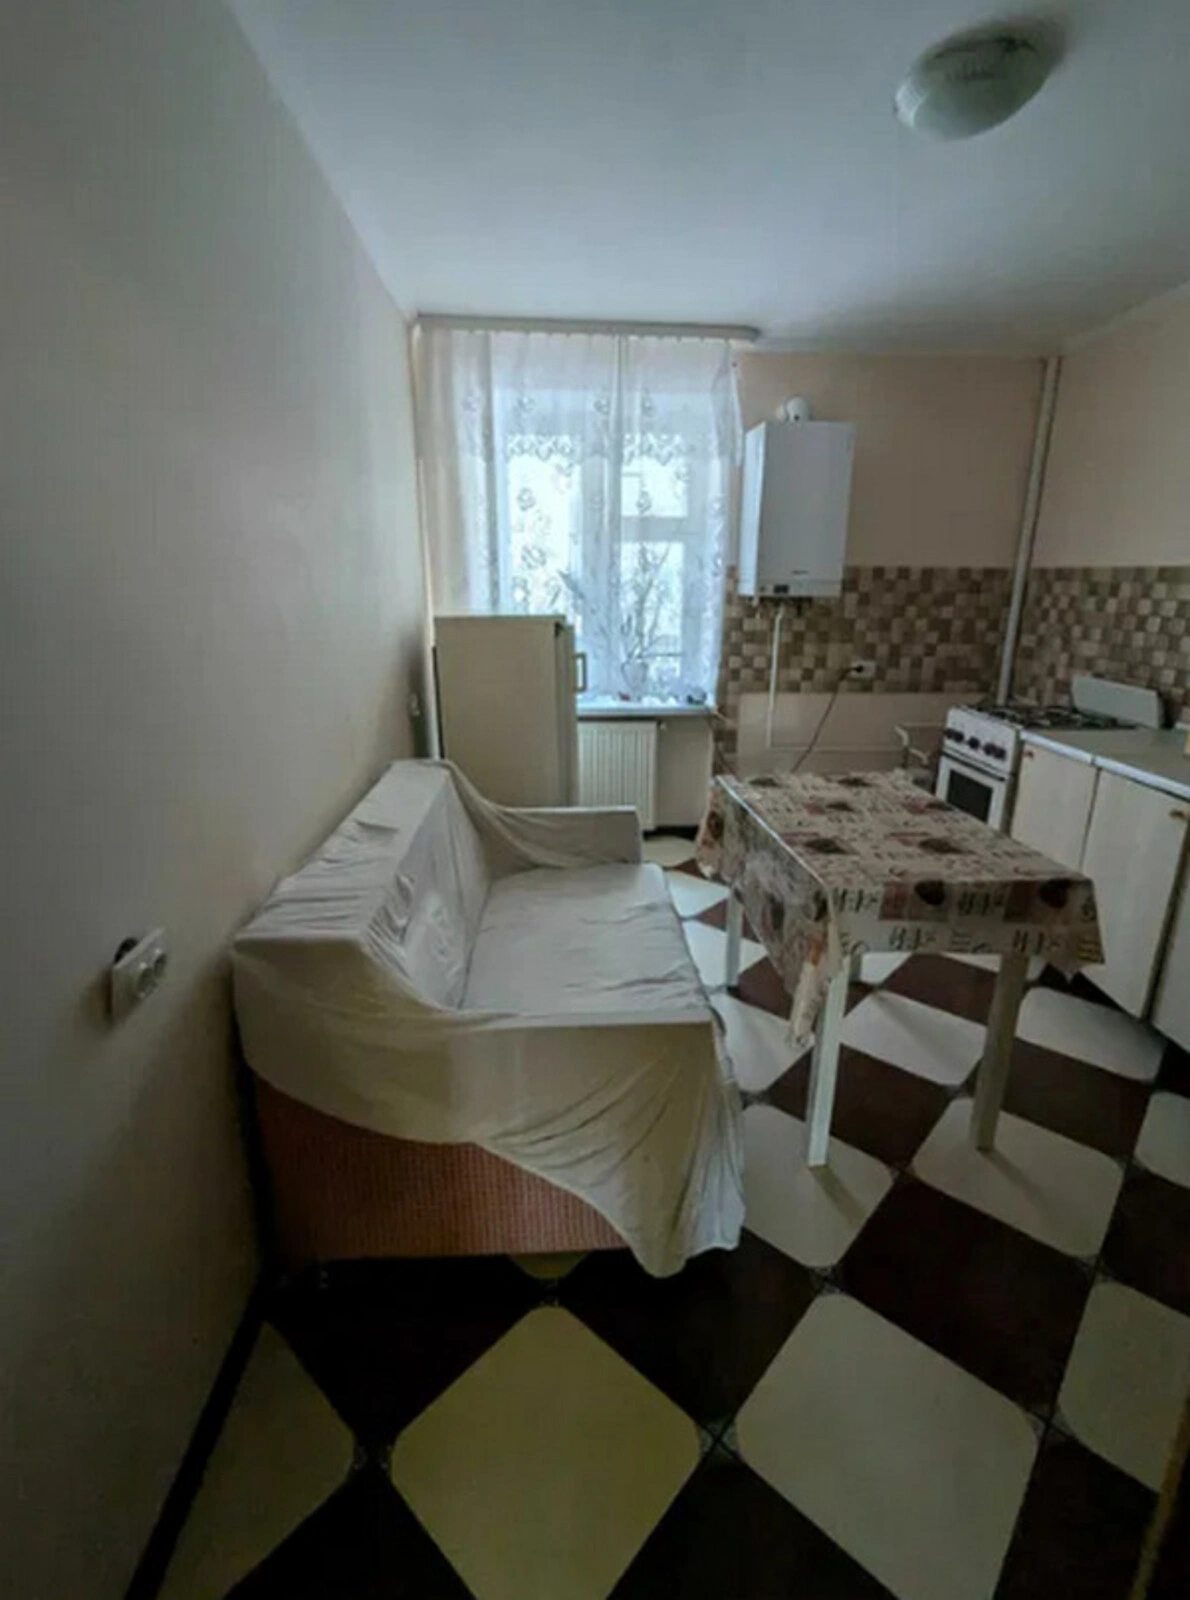 Apartments for sale. 2 rooms, 68 m², 2nd floor/10 floors. Bam, Ternopil. 